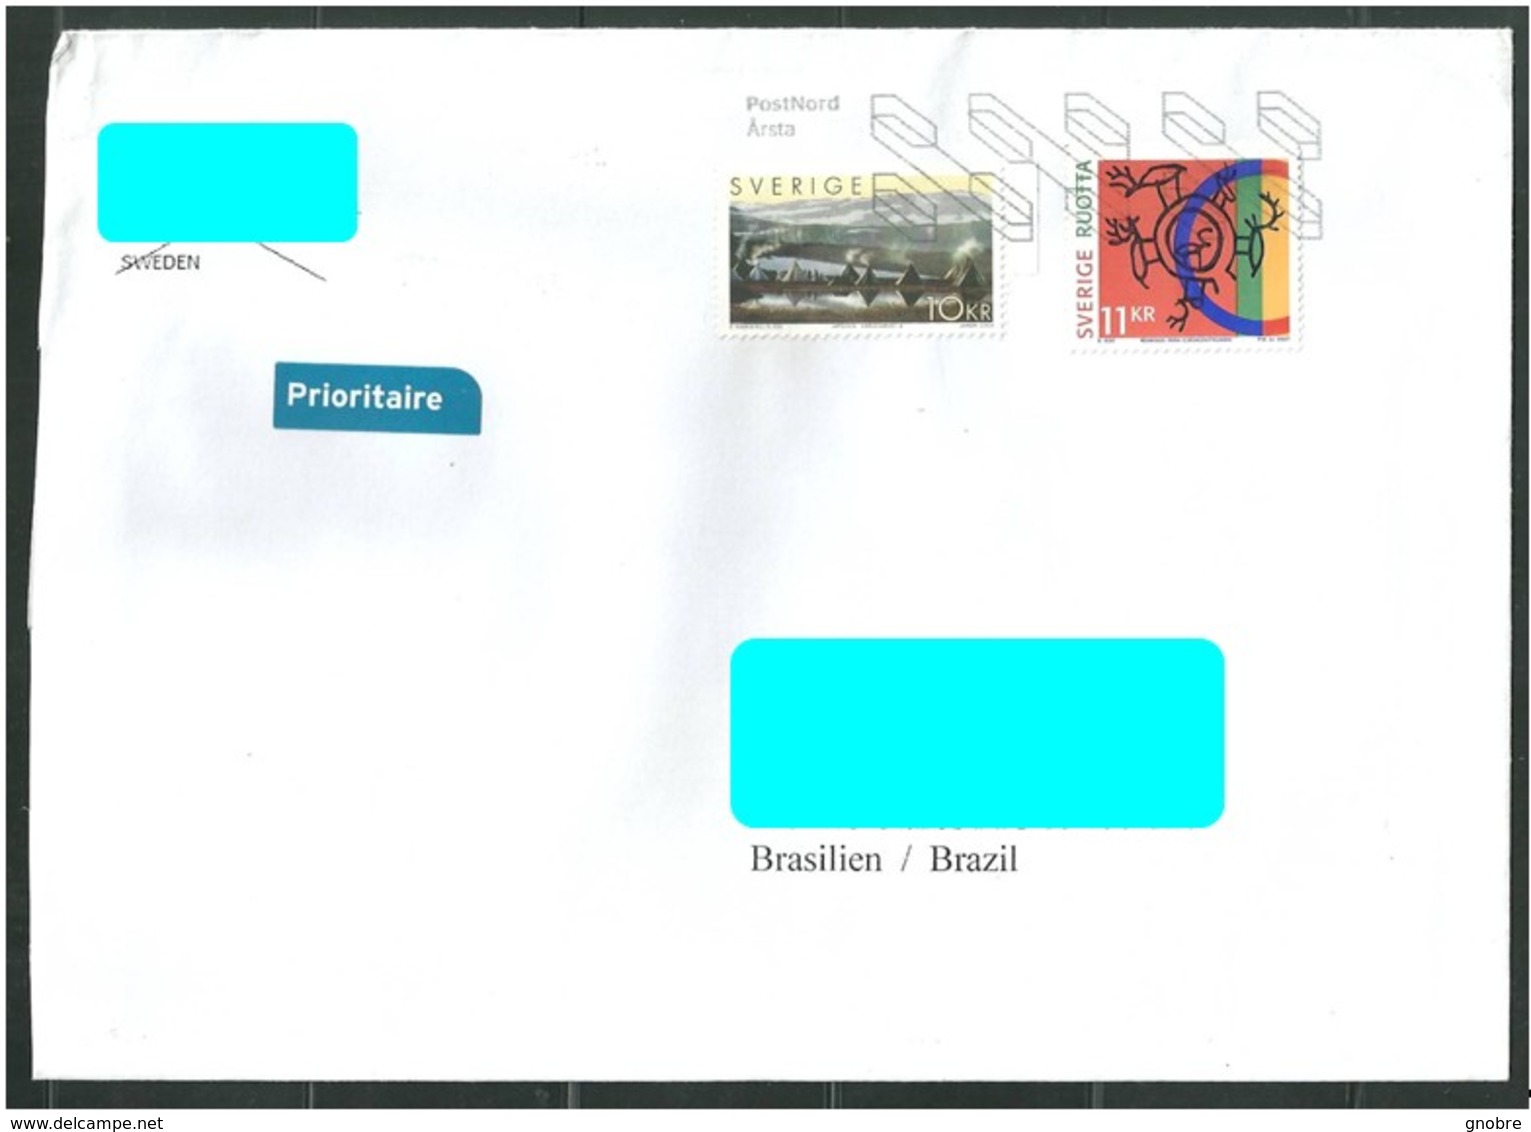 SWEDEN To Brazil Cover Sent In 2018? With 2 Topical Stamps And Beautiful Cancel Mark (GN 0117). - Covers & Documents